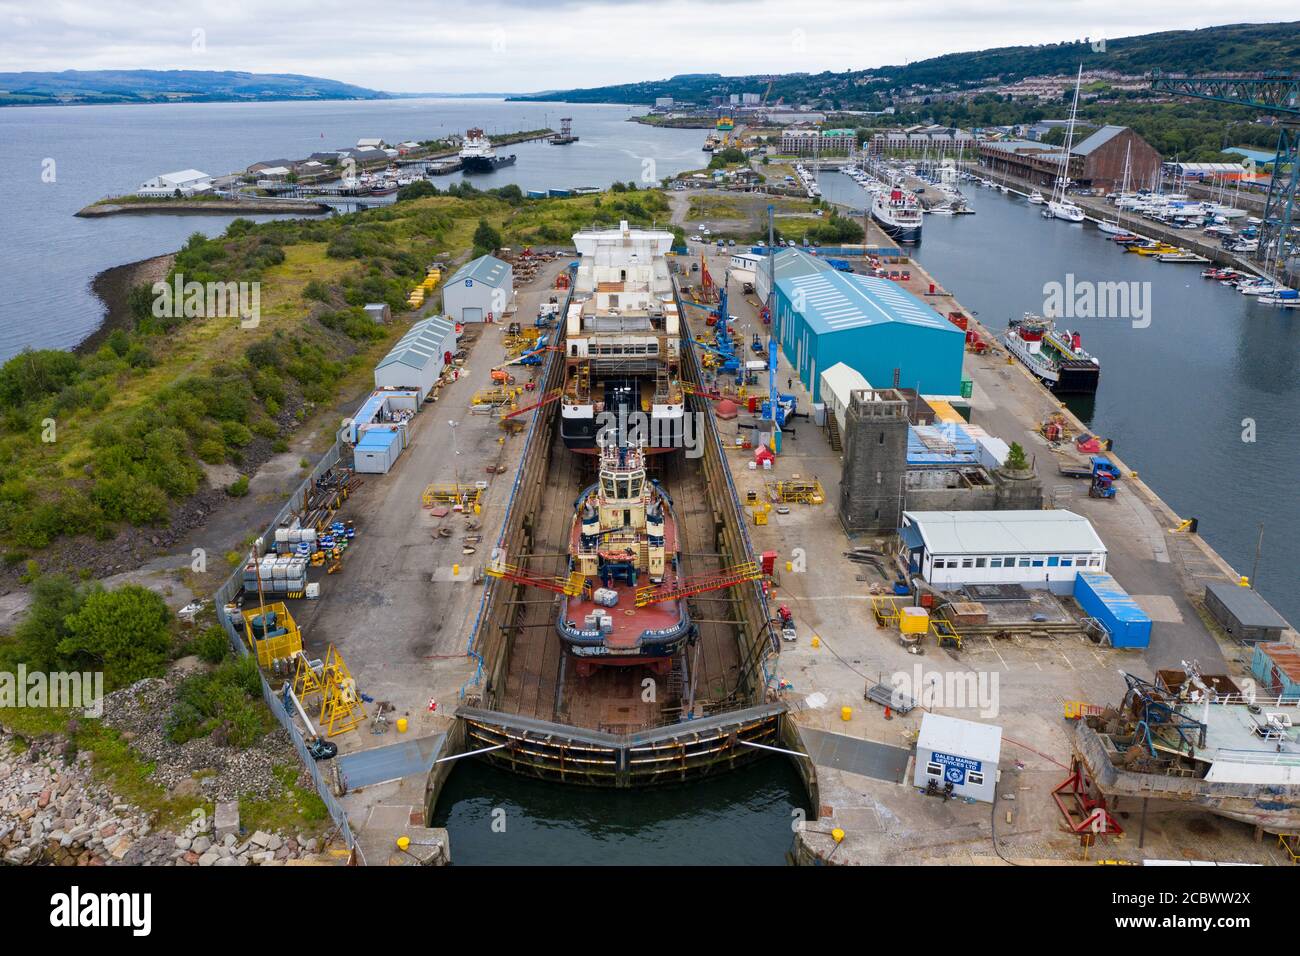 Greenock, Scotland, UK. 16 August, 2020. Aerial view of controversial CalMac ferry MV Glen Sannox in Dales Dry Dock in Greenock on the River Clyde.The partially built ferry  which is well over budget and years late, was moved from Ferguson Marine shipyard in Port Glasgow to the nearby dry dock this week for modifications to the bow, repairs and cleaning.  Iain Masterton/Alamy Live News Stock Photo